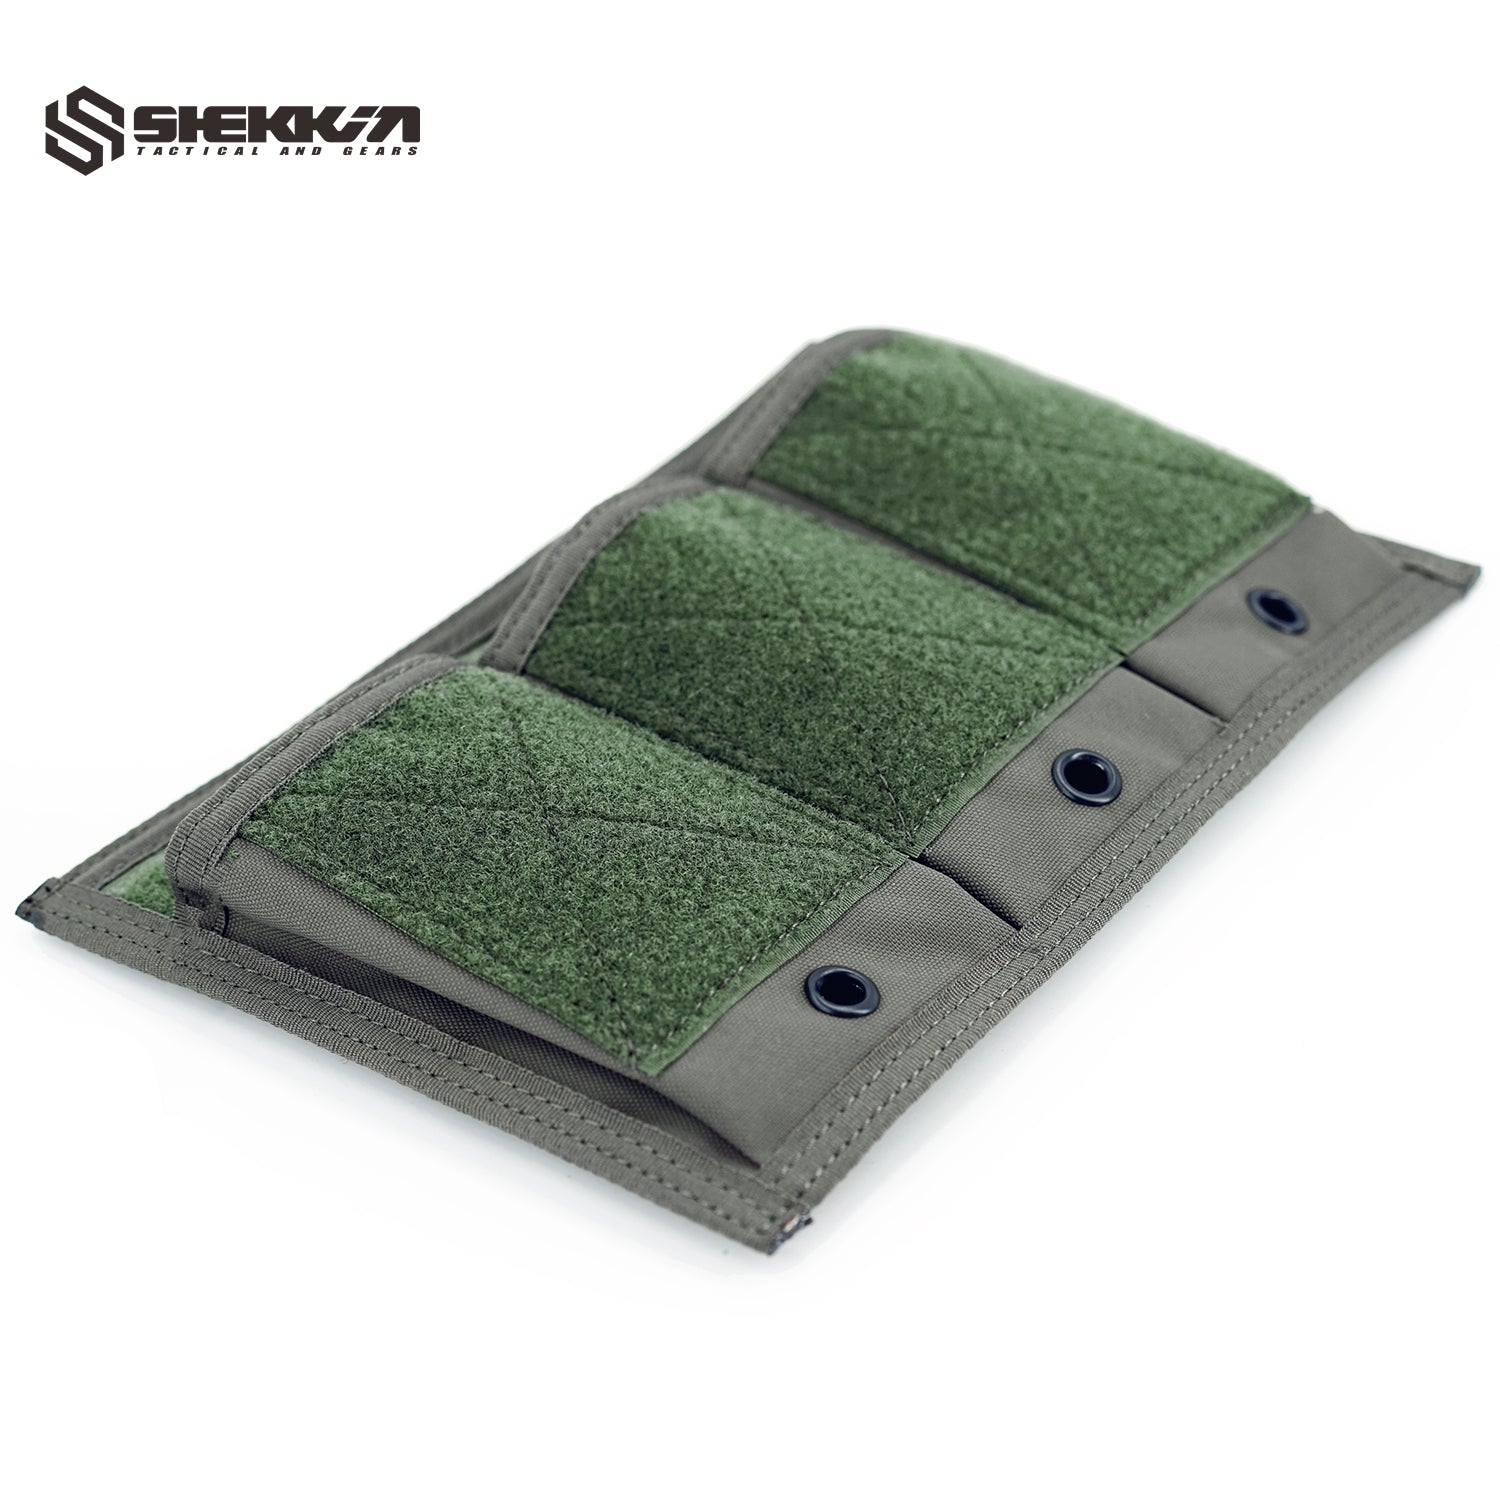 Pre MSA Paraclete style Smoke green triple M4 mag pouch with velcro back - Shekkin Gears